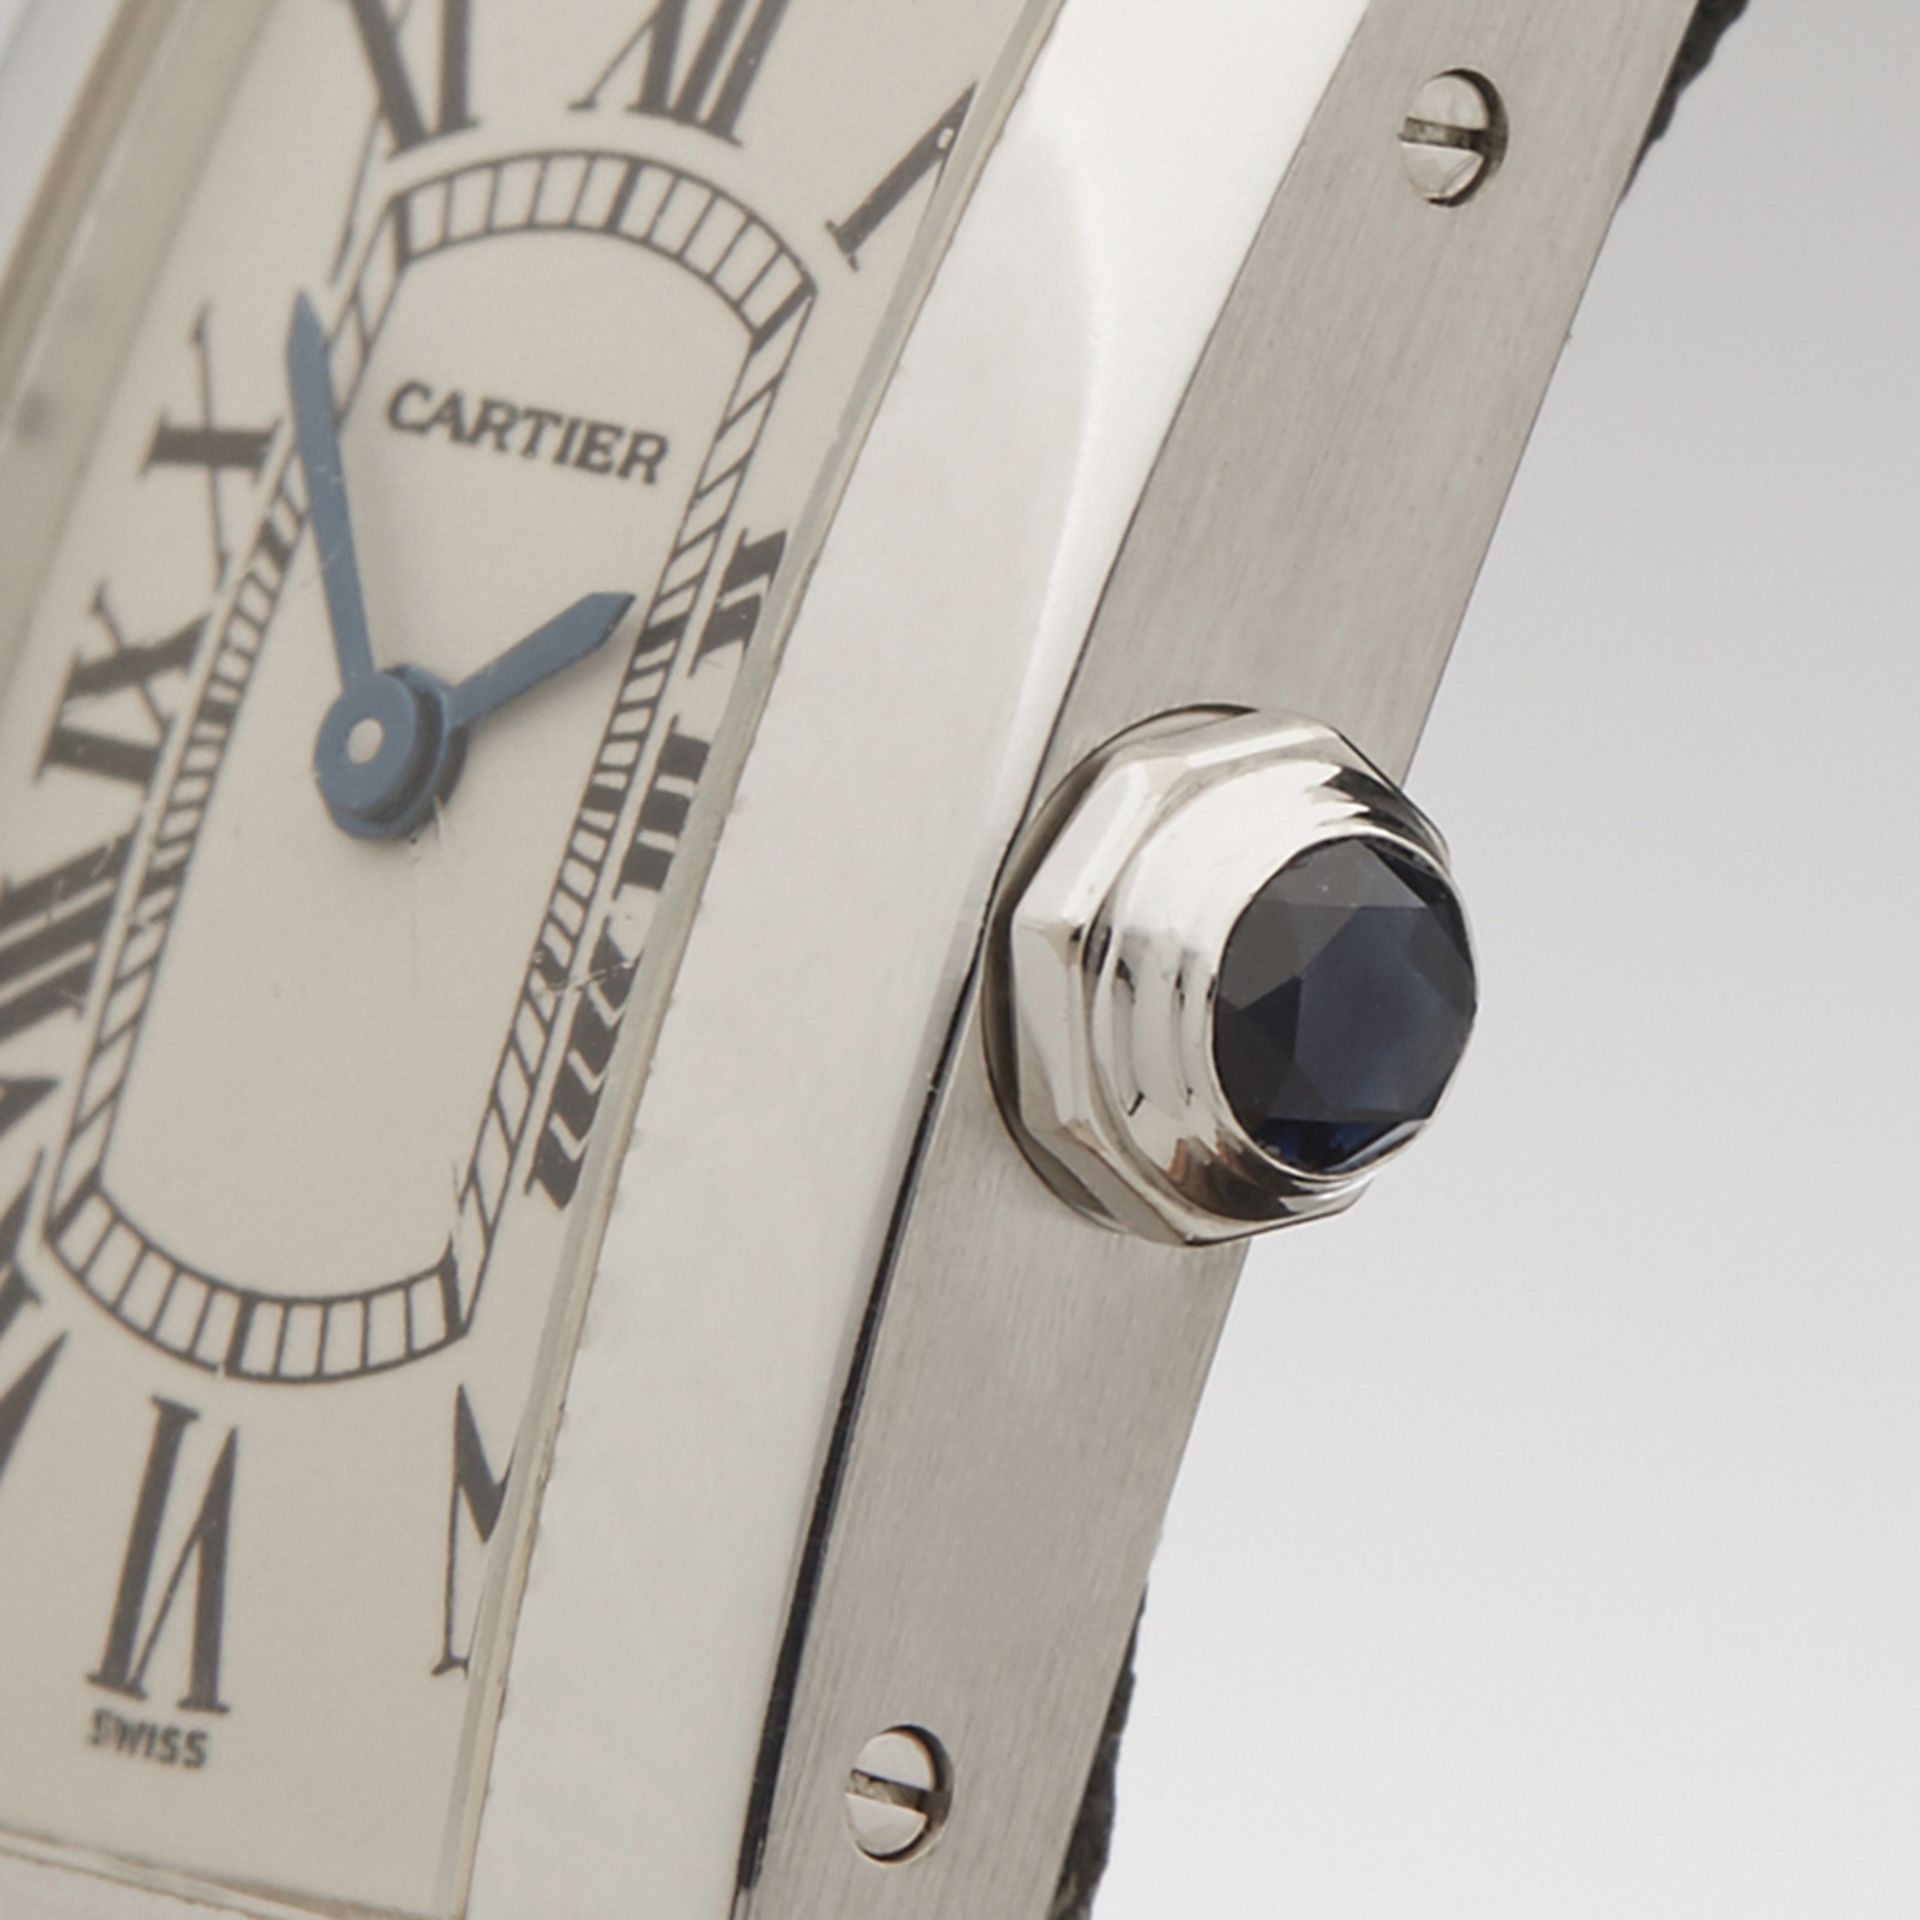 Cartier, Tank Americaine 20mm 18k White Gold 1713 - Image 4 of 8